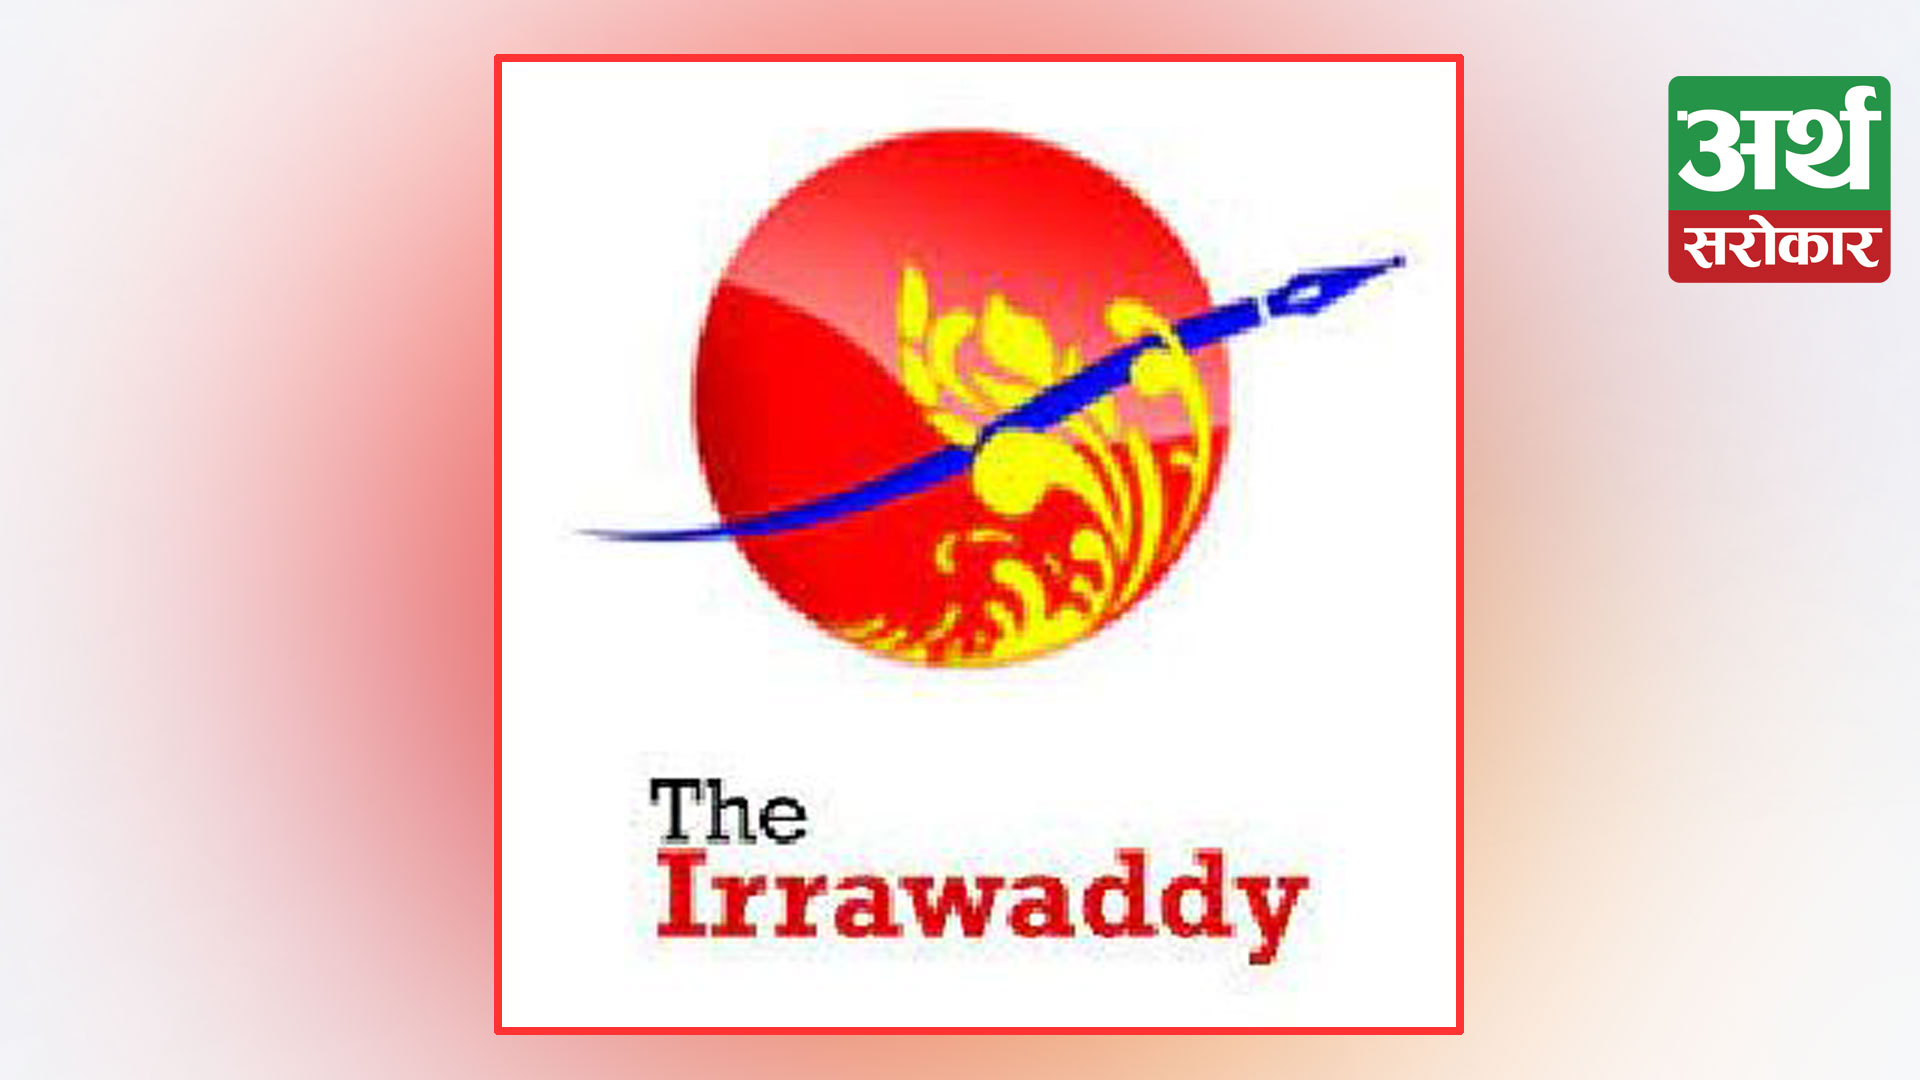 Myanmar’s ‘The Irrawaddy’ News Portal should highlight Rohingya refugee issue more